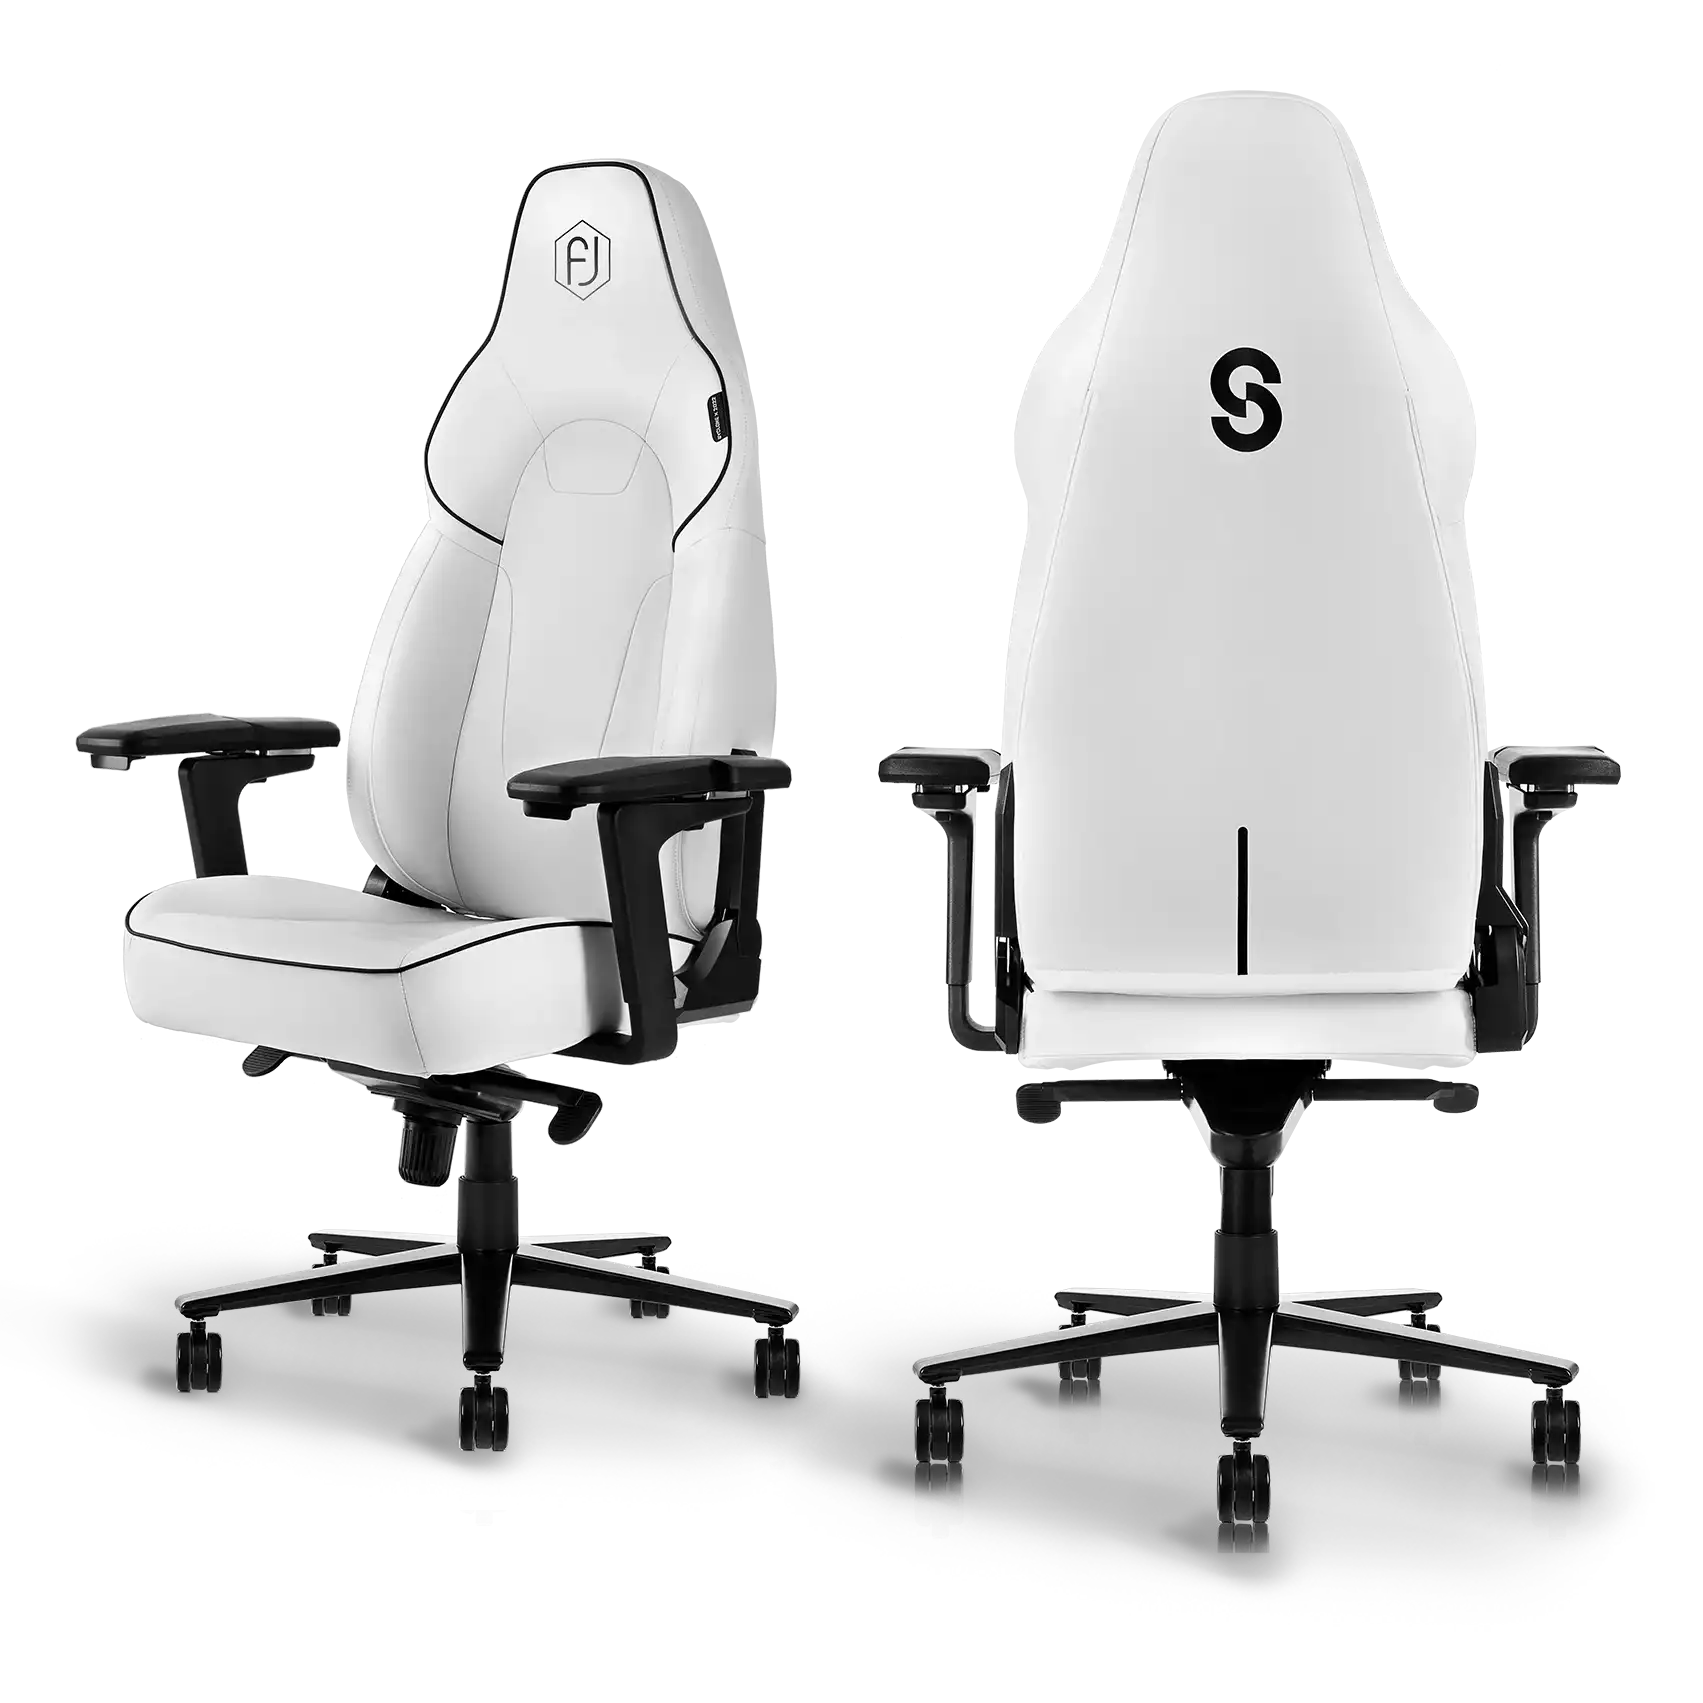 Syclone Pro Professional Gaming Chair in white and black, designed for optimal comfort and style with adjustable ergonomic features for serious gamers